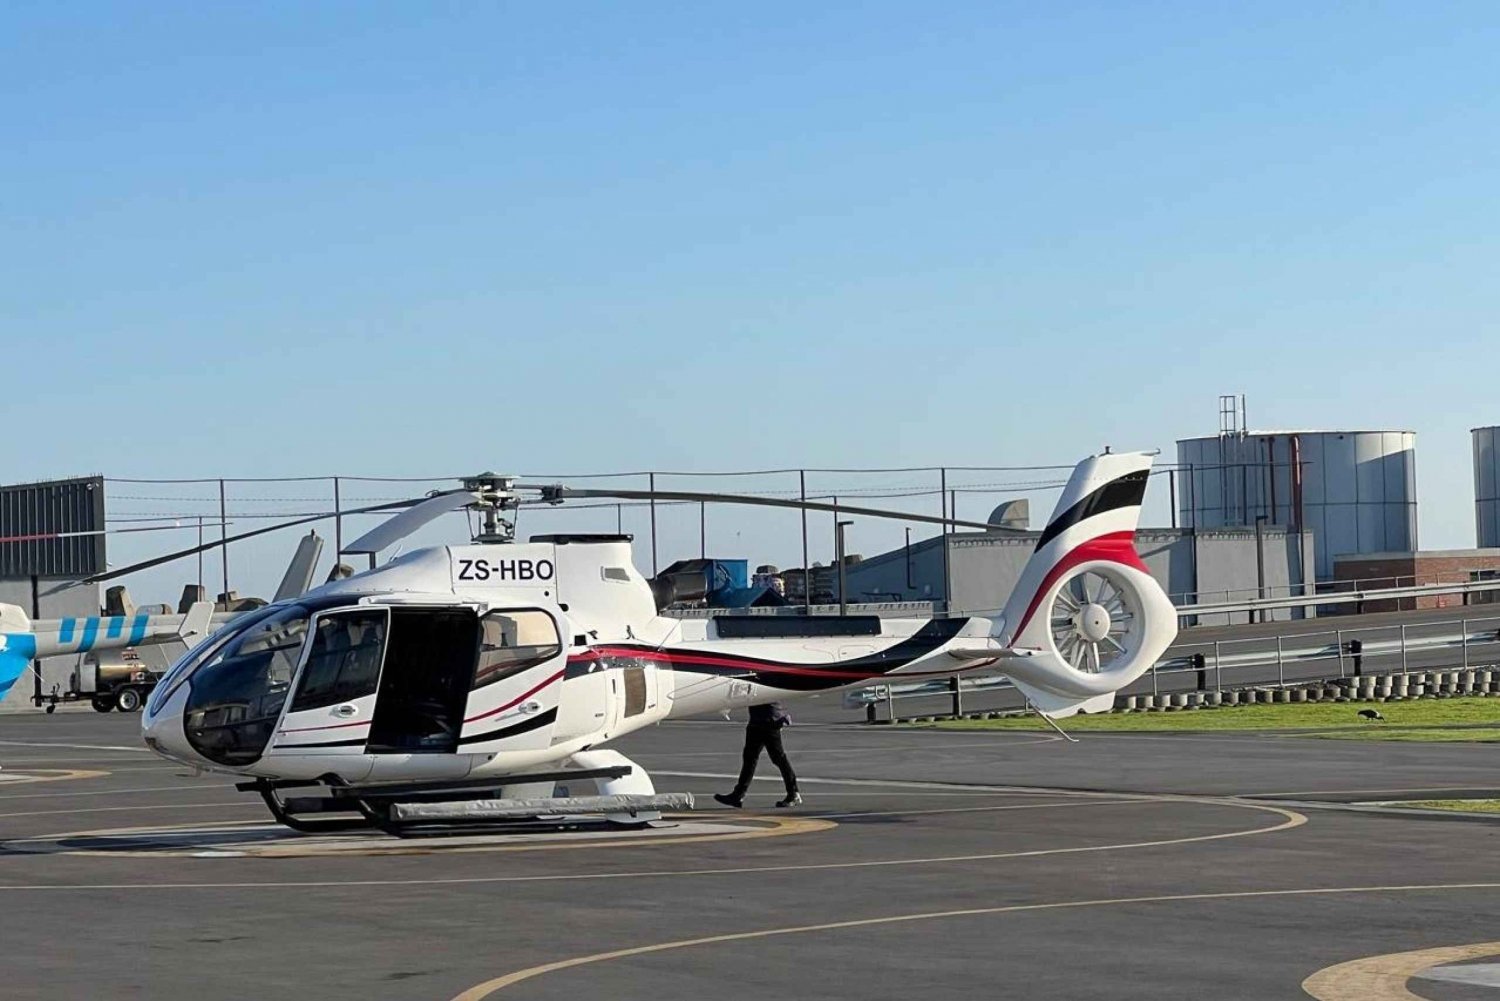 A 20 minute helicopter tour of the Durbanville Wine Region